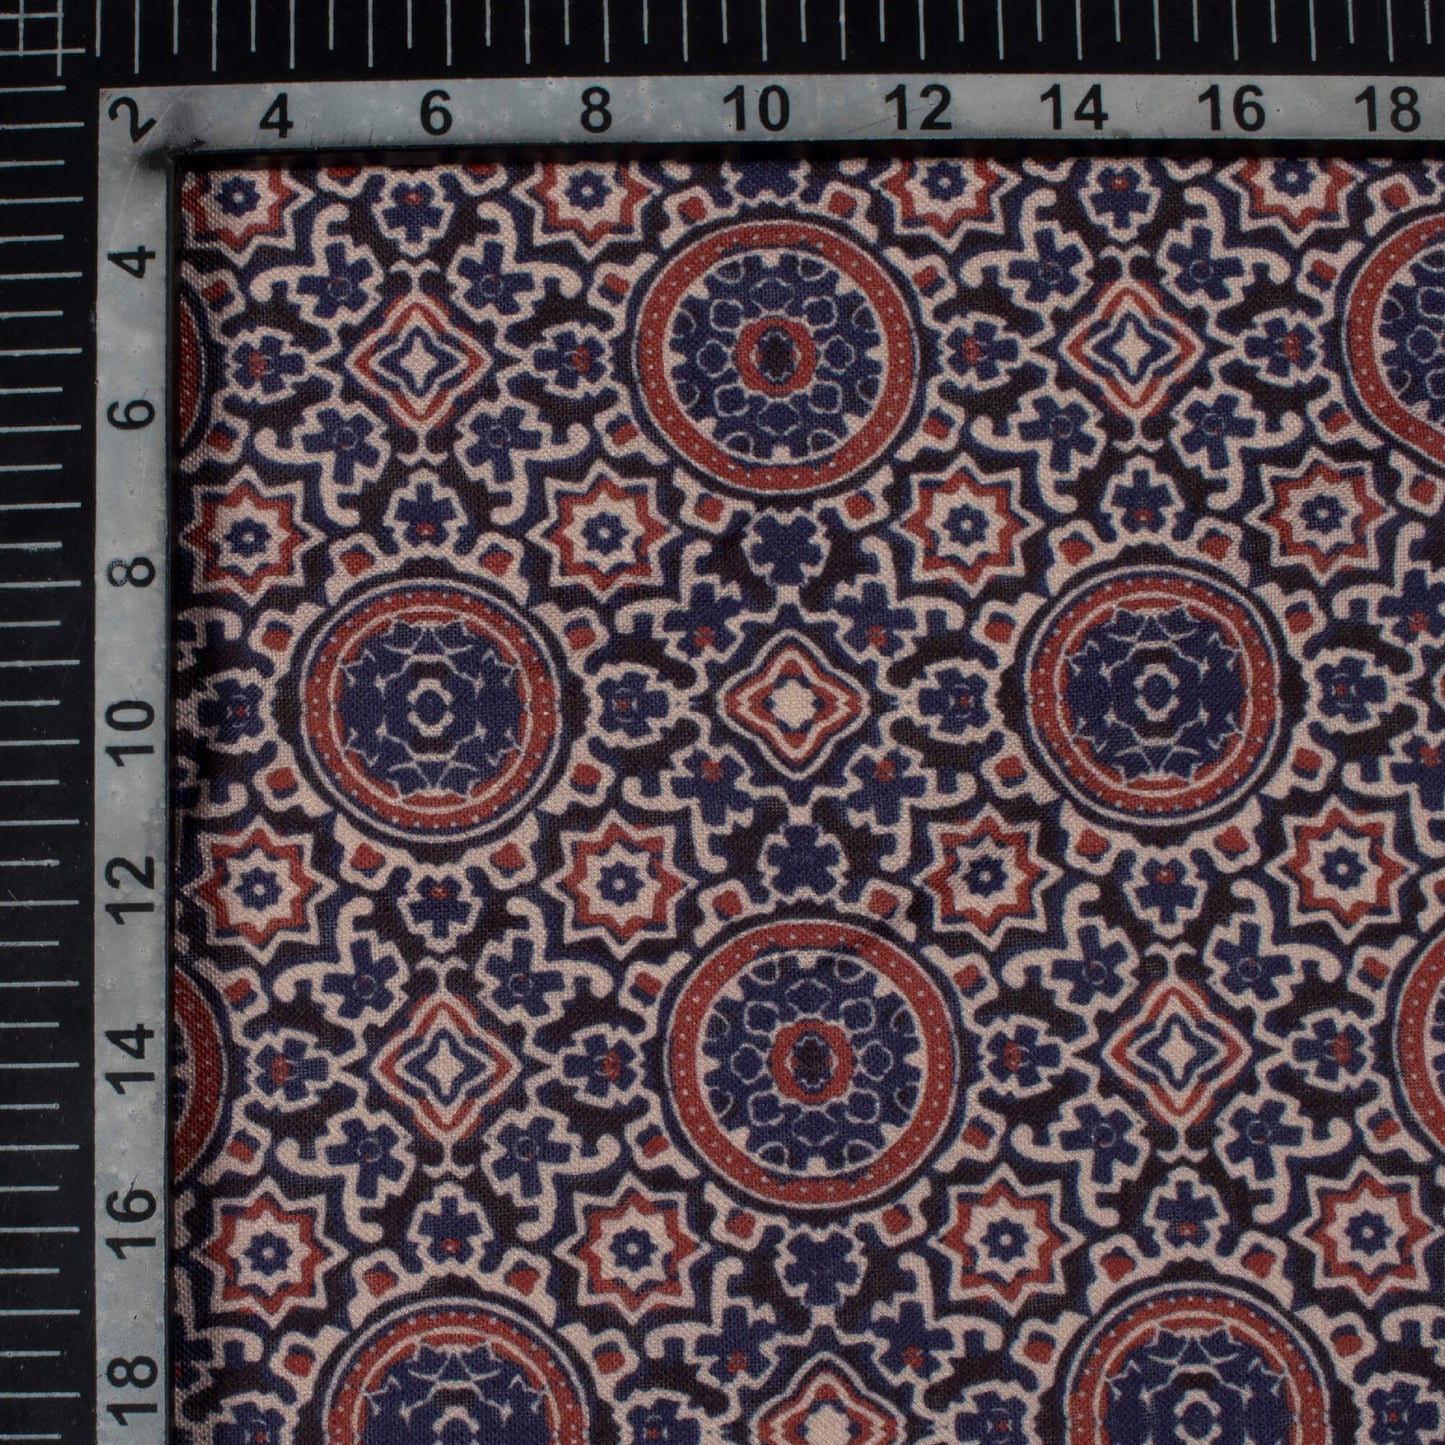 Dark Blue And Sangria Red Ajrakh Pattern Digital Print Linen Textured Fabric (Width 56 Inches)